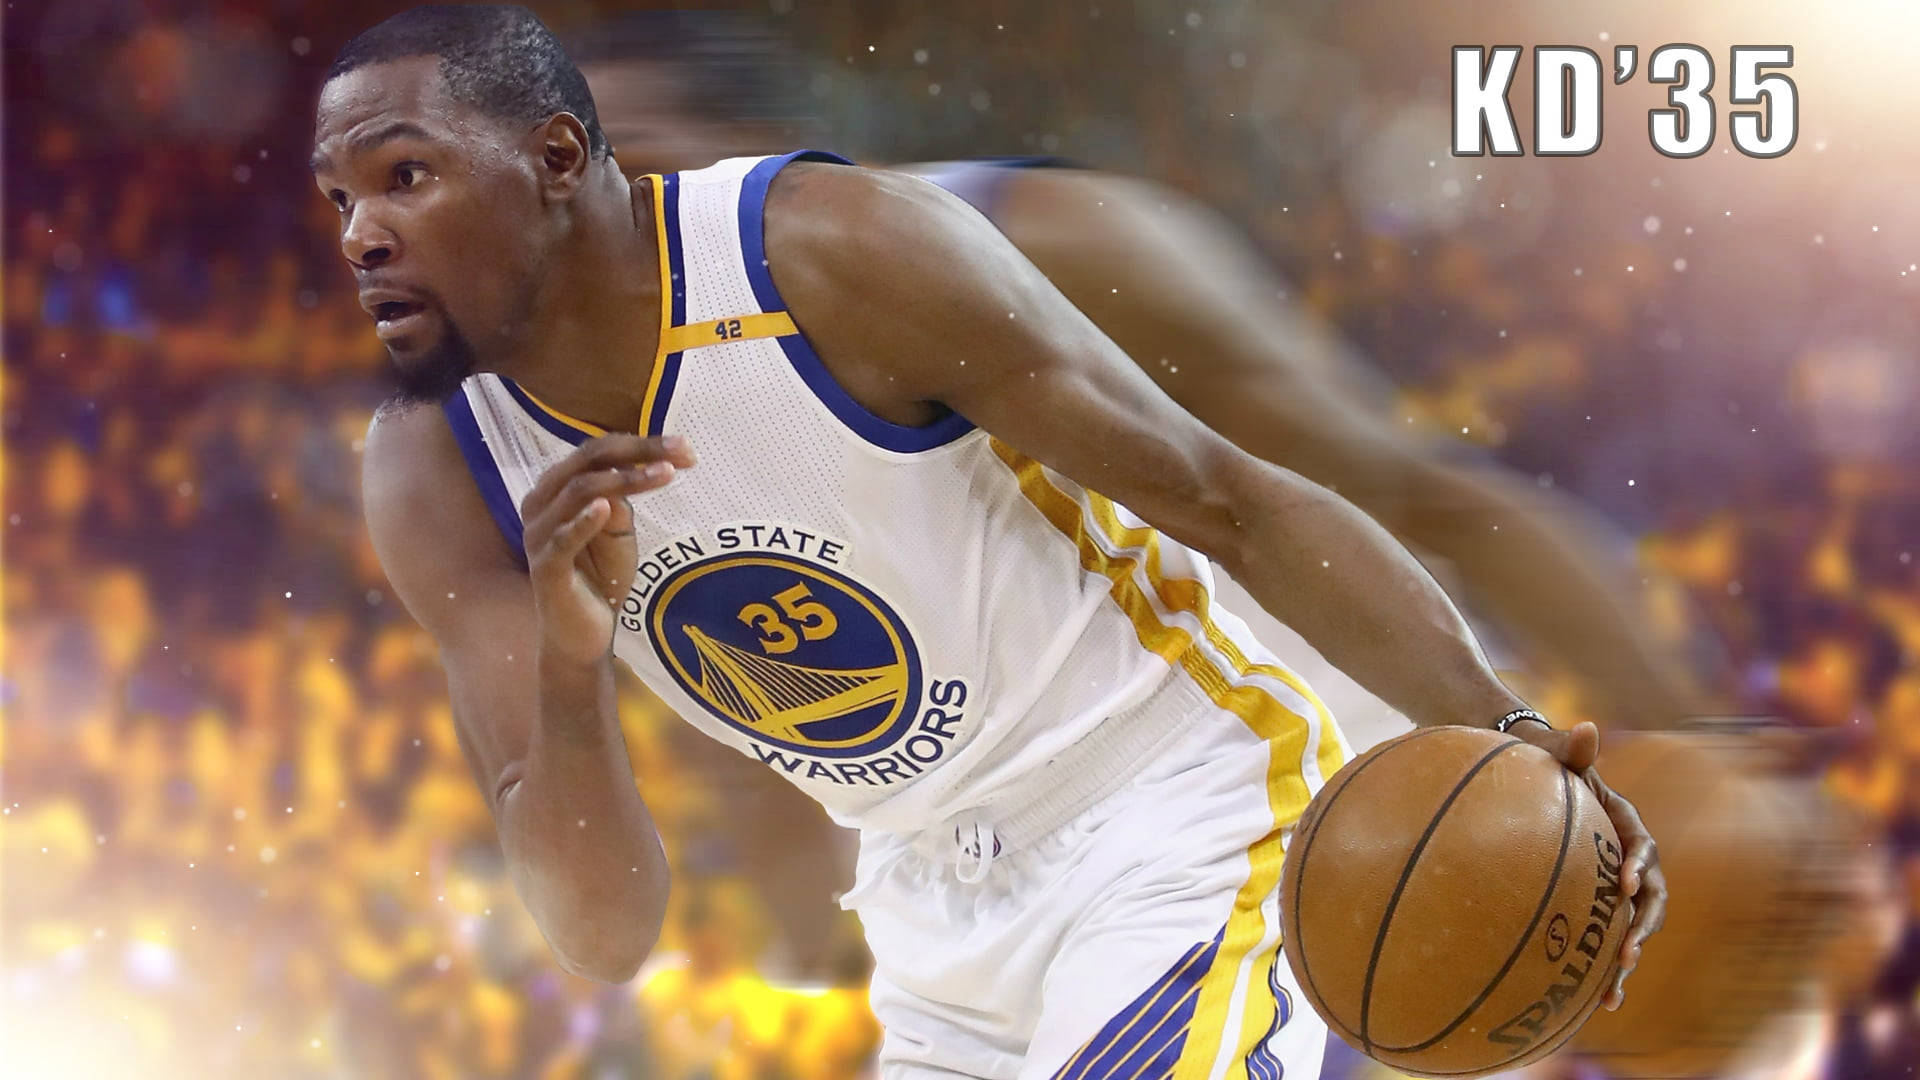 Kevin Durant Player Number 35 Wallpaper